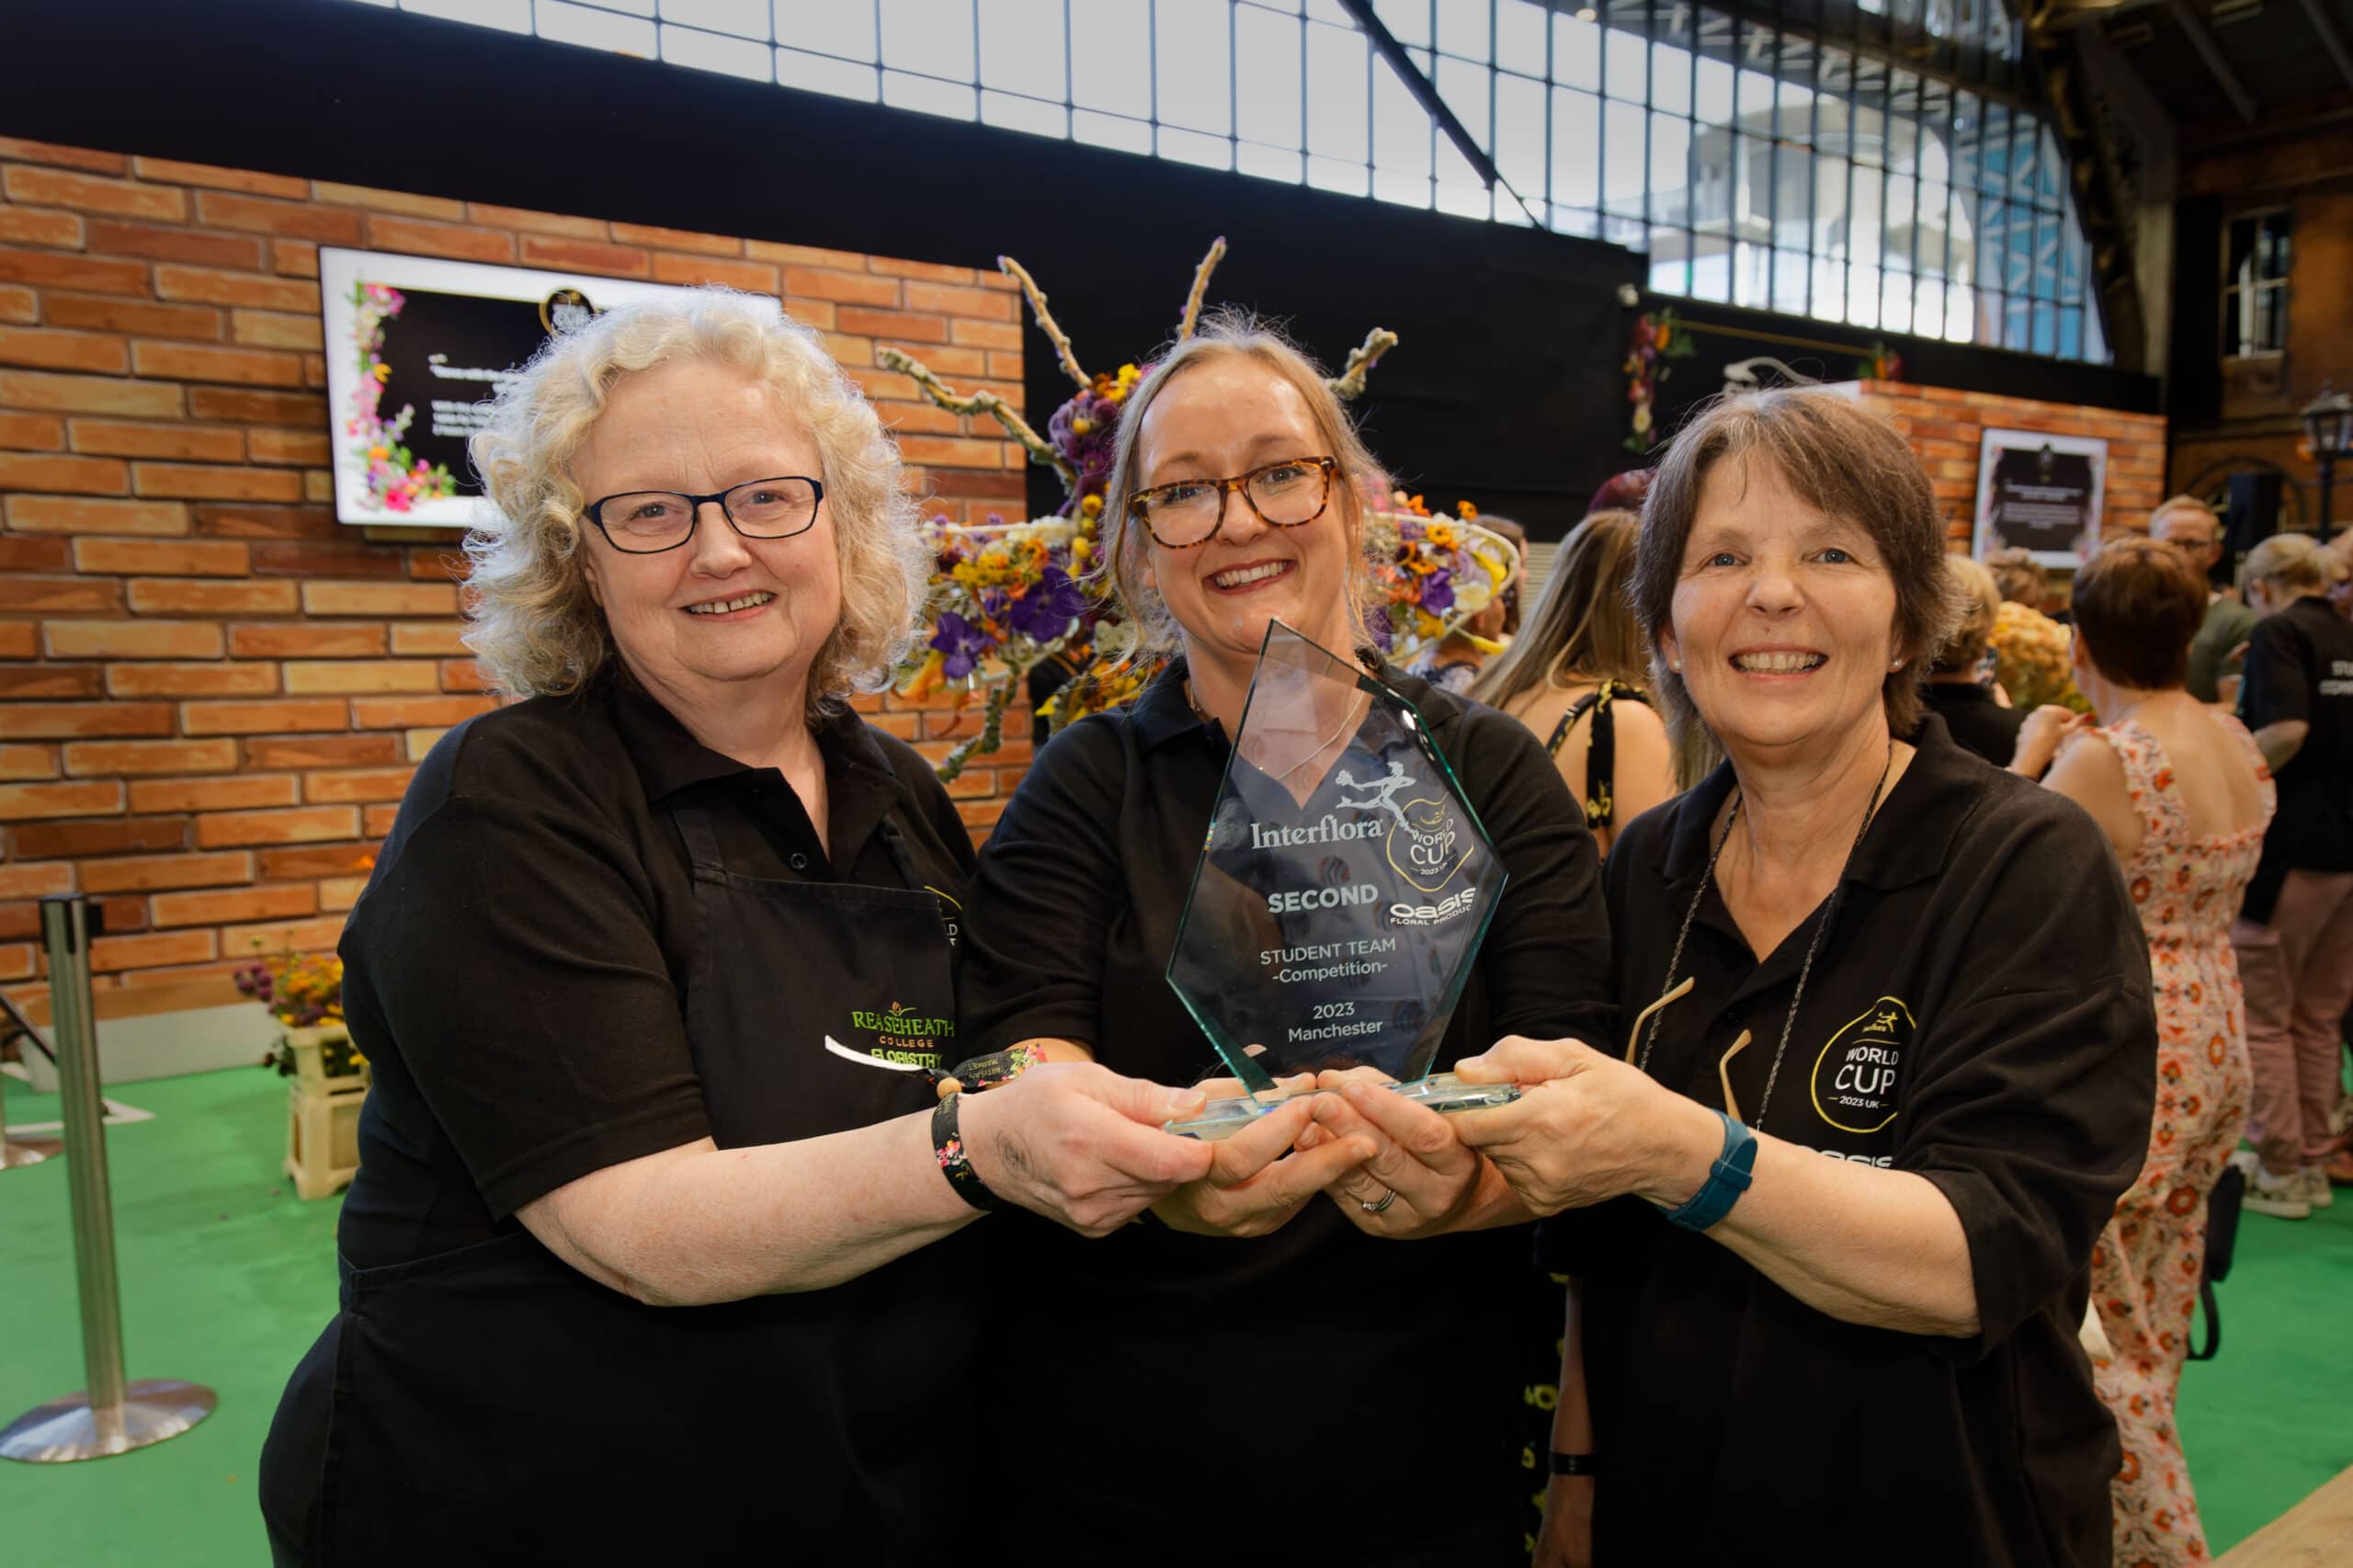 UCR Floristry students with second place Interflora award